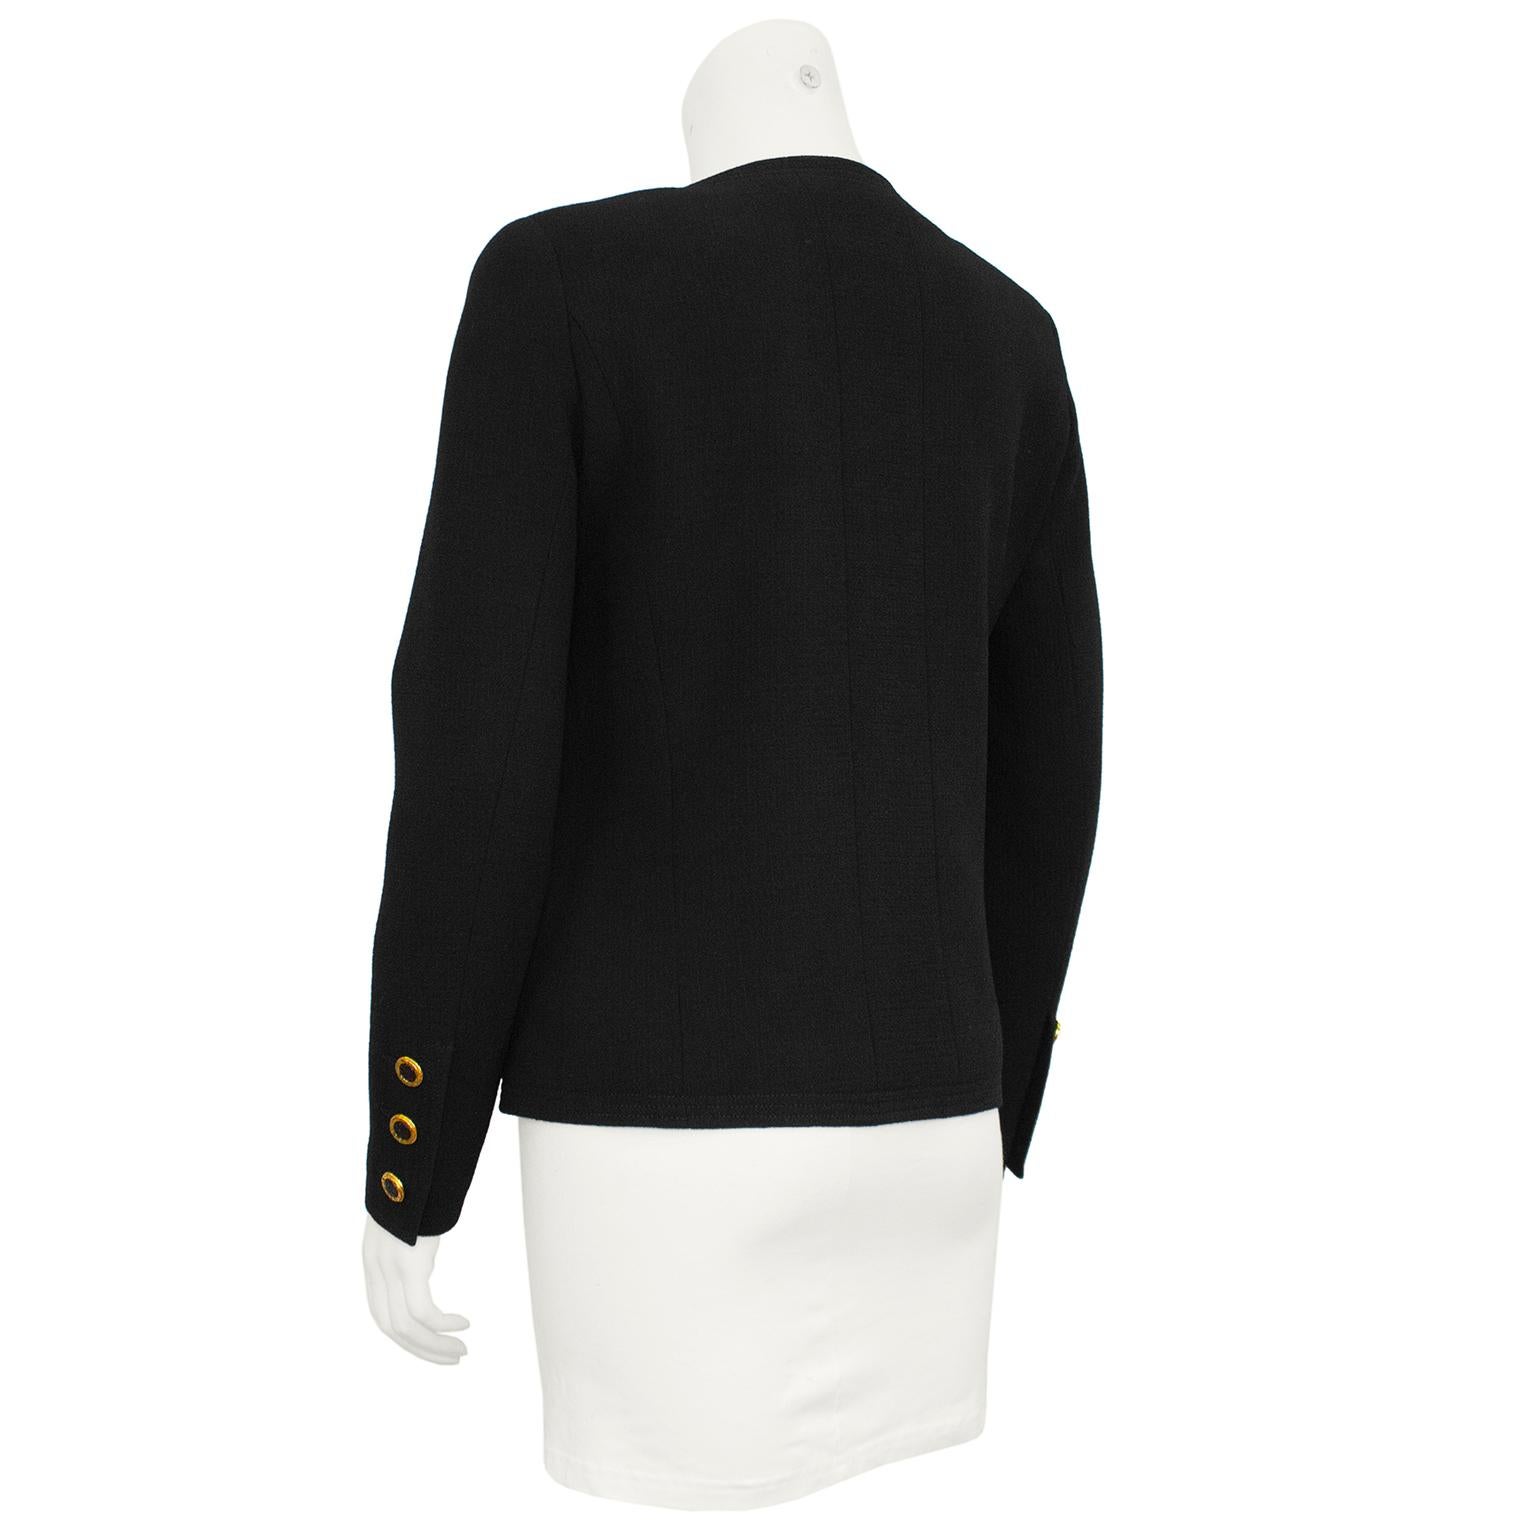 1990s Chanel Black Collarless Jacket with Gold Buttons In Good Condition For Sale In Toronto, Ontario